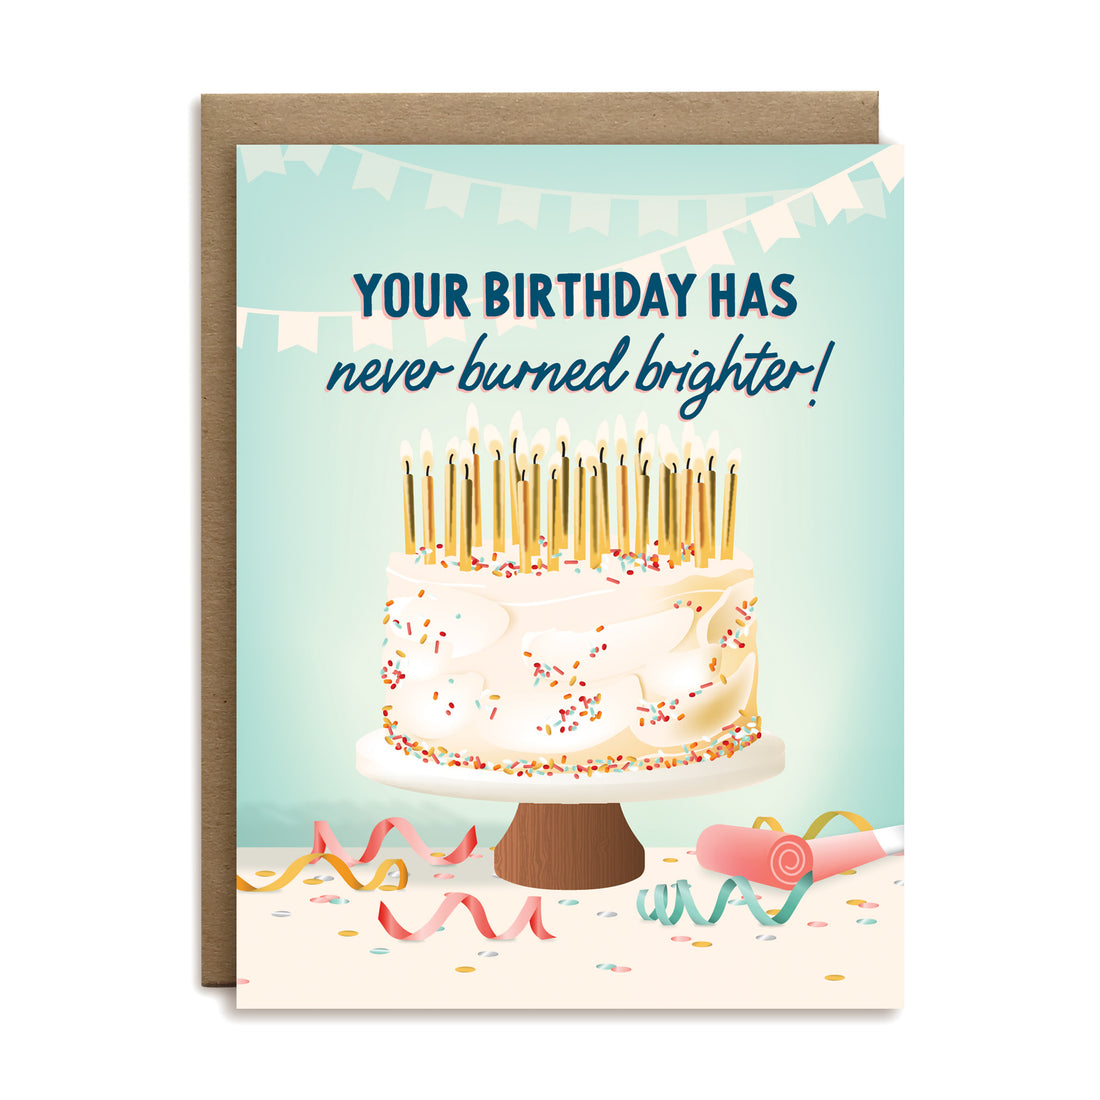 Your birthday has never burned brighter greeting card by I&